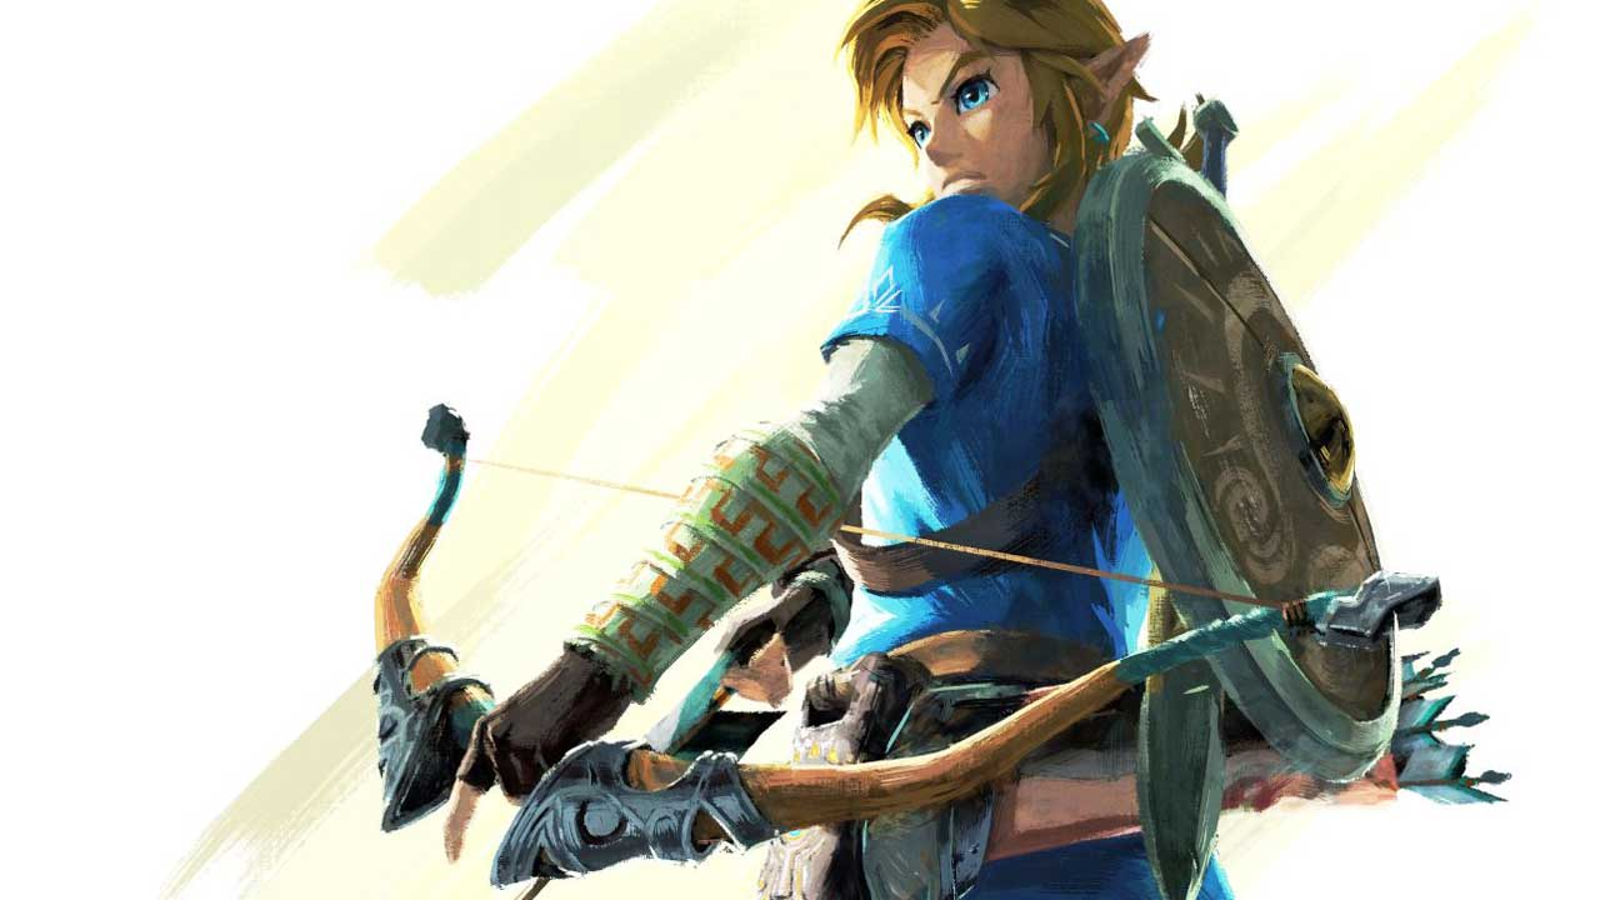 Zelda: Breath of the Wild has the most perfect review scores in